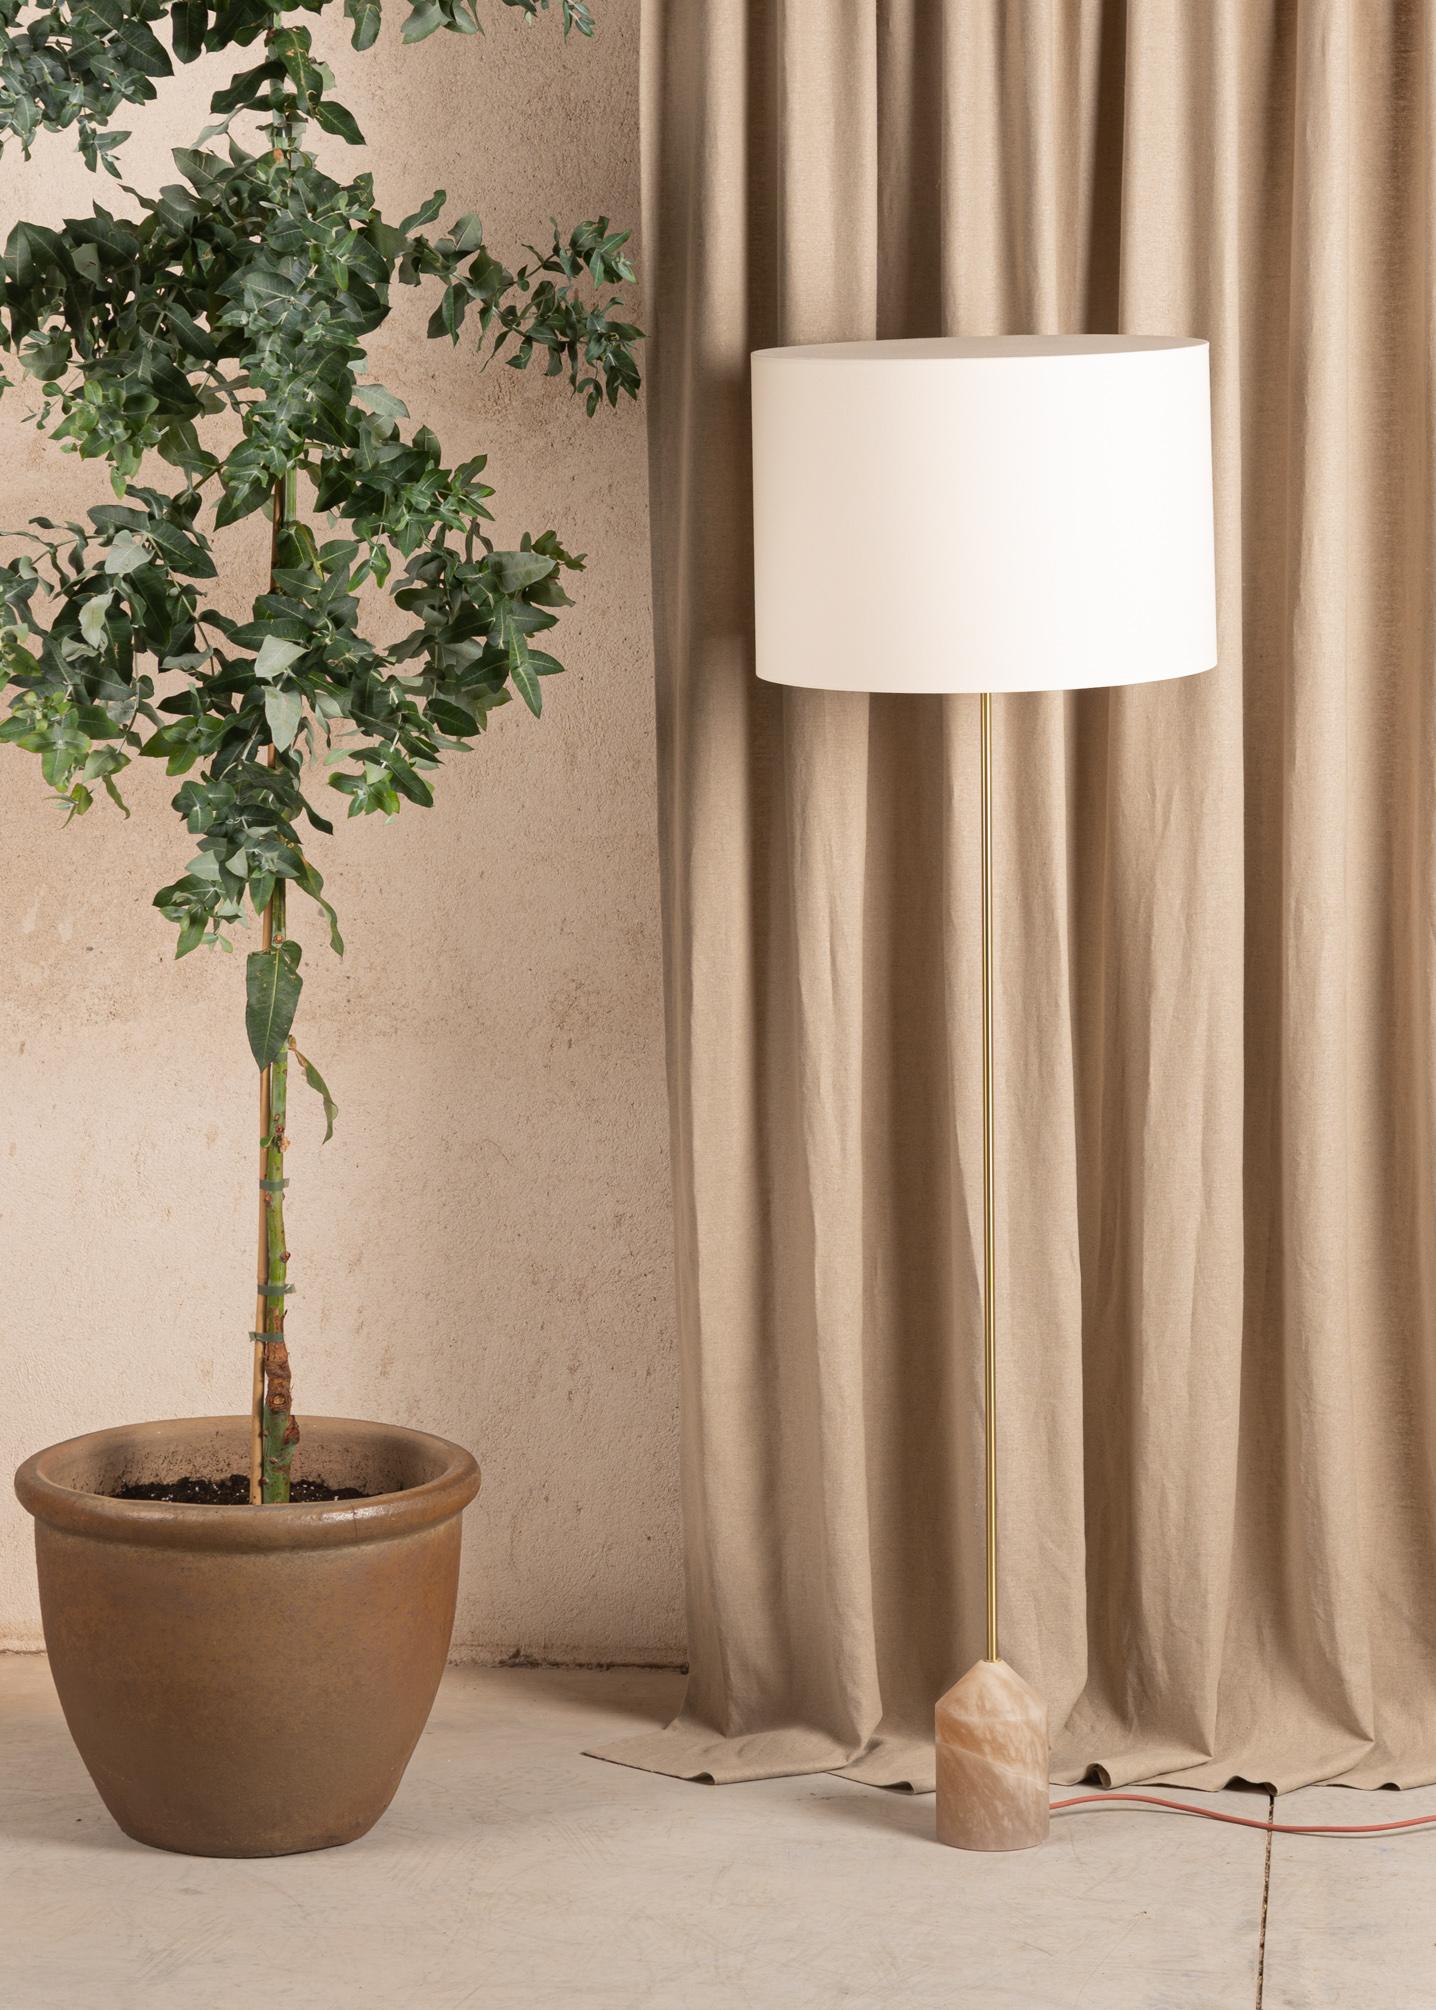 Baleto Tobacco Alabaster Floor Lamp by Simone & Marcel
Dimensions: D 50 x W 50 x H 166 cm.
Materials: Brass, cotton and tobacco alabaster.

Also available in different marble and alabaster options and finishes. Custom options available on request.